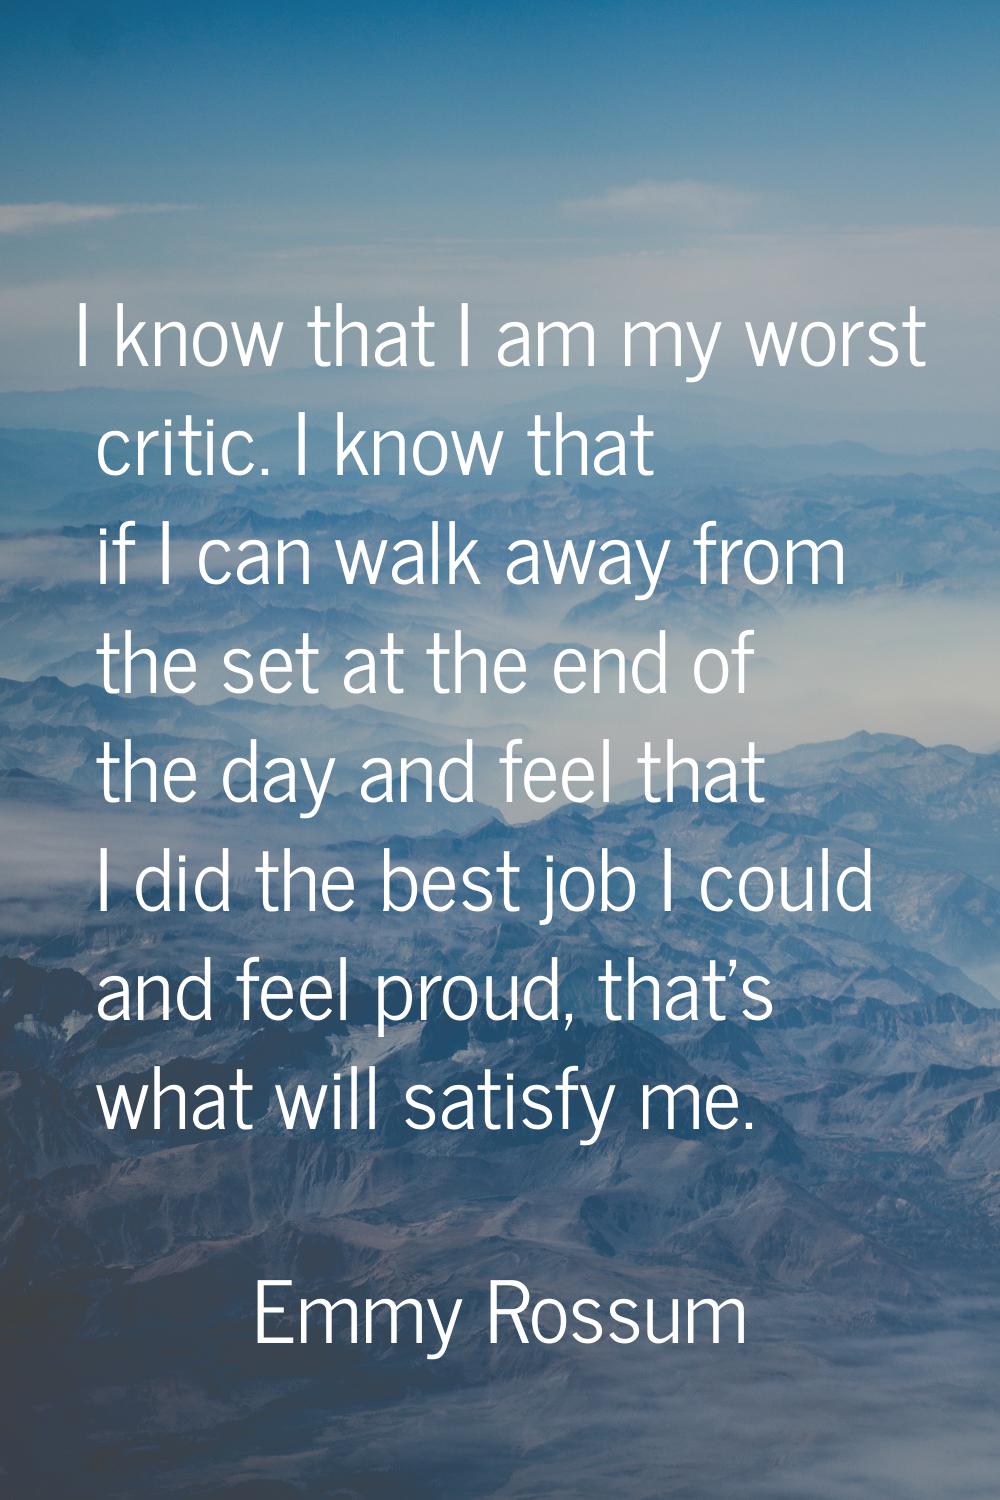 I know that I am my worst critic. I know that if I can walk away from the set at the end of the day